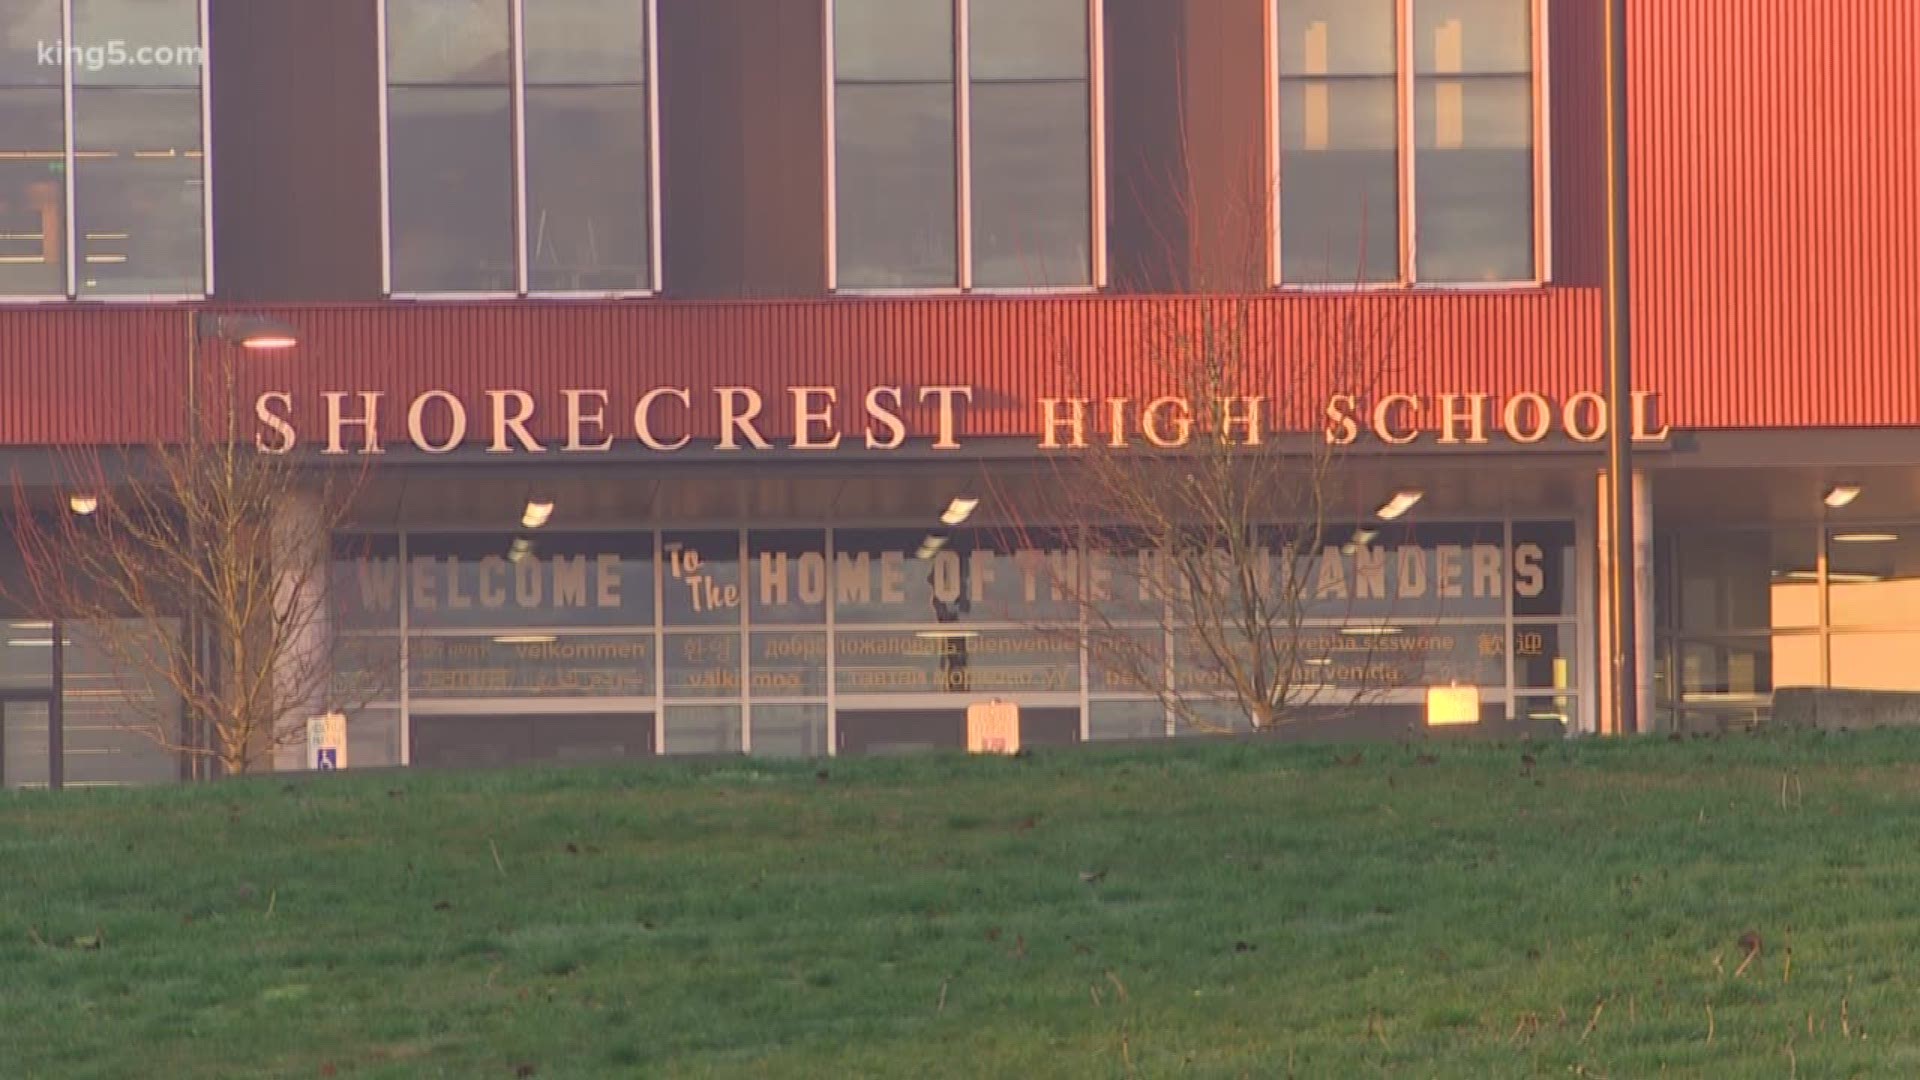 The King County Sheriff’s Office has identified five students who are allegedly connected to ammunition that was found at Shorecrest High School on Dec. 9, 2019.